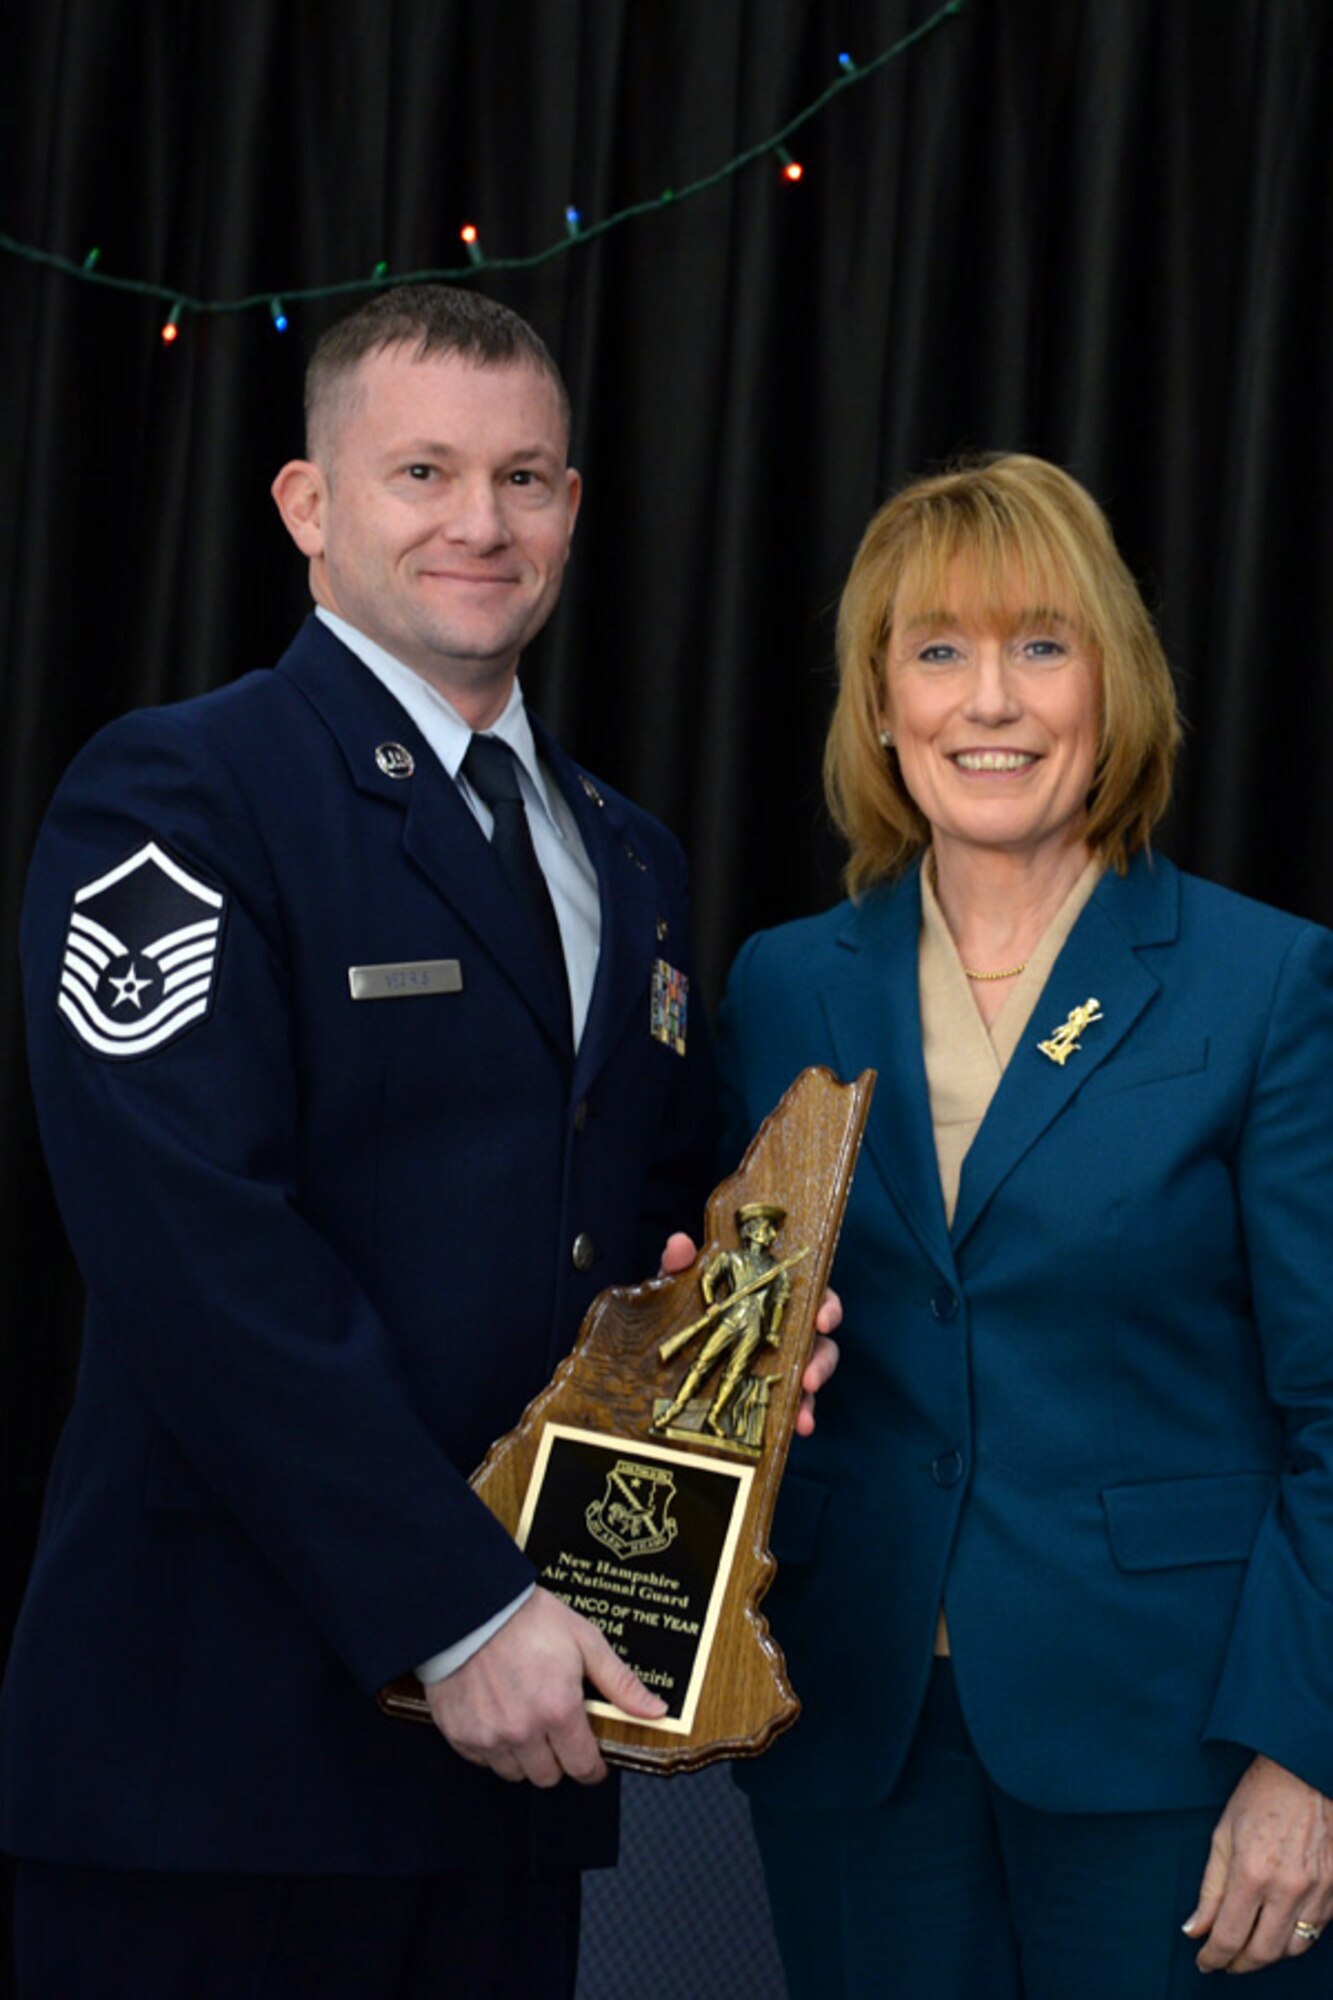 Master Sgt. Jason Veziris with the 157th Operations Squadron is presented the 157th Air Refueling Wing's Senior Non-Commissioned Officer of the Year award by N.H. Governor Maggie Hassan, Pease Air National Guard Base, N.H., Dec 7, 2014. (Air National Guard photo by Staff Sgt. Curtis J. Lenz/Released)